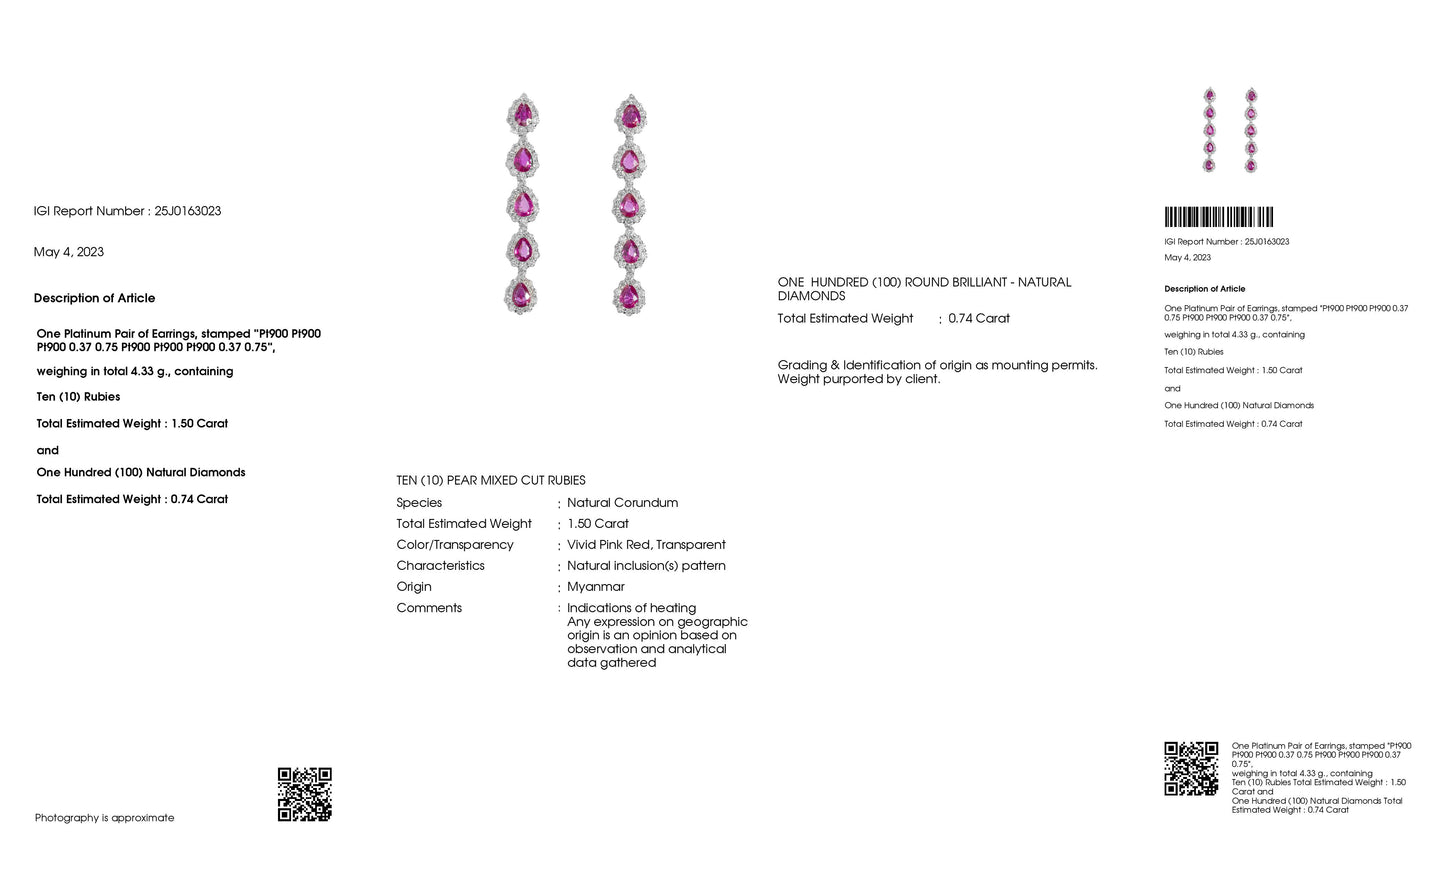 1.00ct NATURAL BURMA RUBIES and 0.80ct NATURAL DIAMONDS set with platinum pair of Earrings - SALE